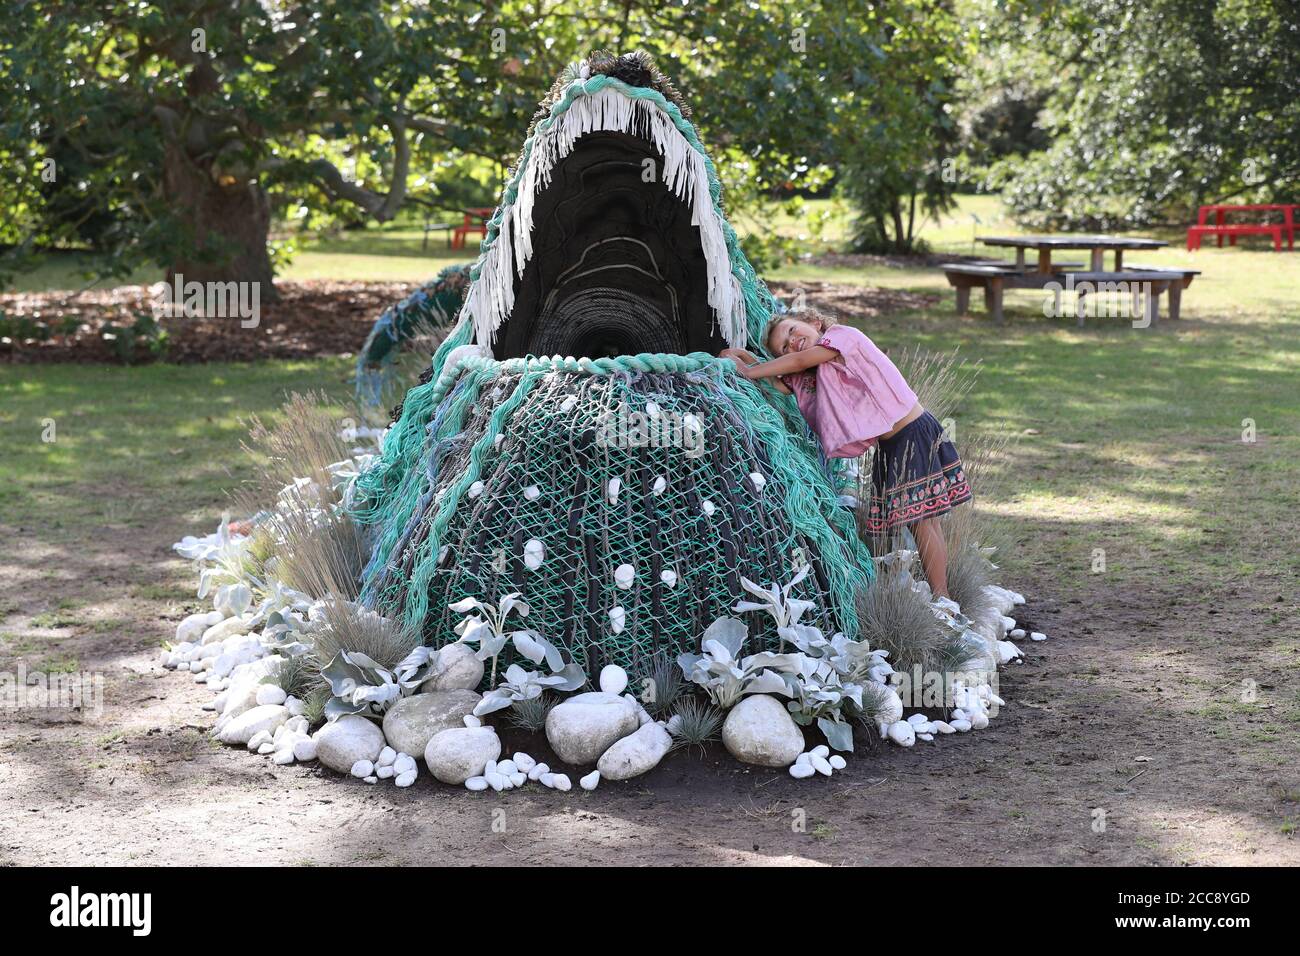 Five year old Sylvie Fodio Todd from Lewes looking at the botanical sculpture of a humpback whale emerging from the Orangery Lawn as it goes on on display until September 18 as part of the Travel the World at Kew festival at the Royal Botanic Gardens in London. Stock Photo